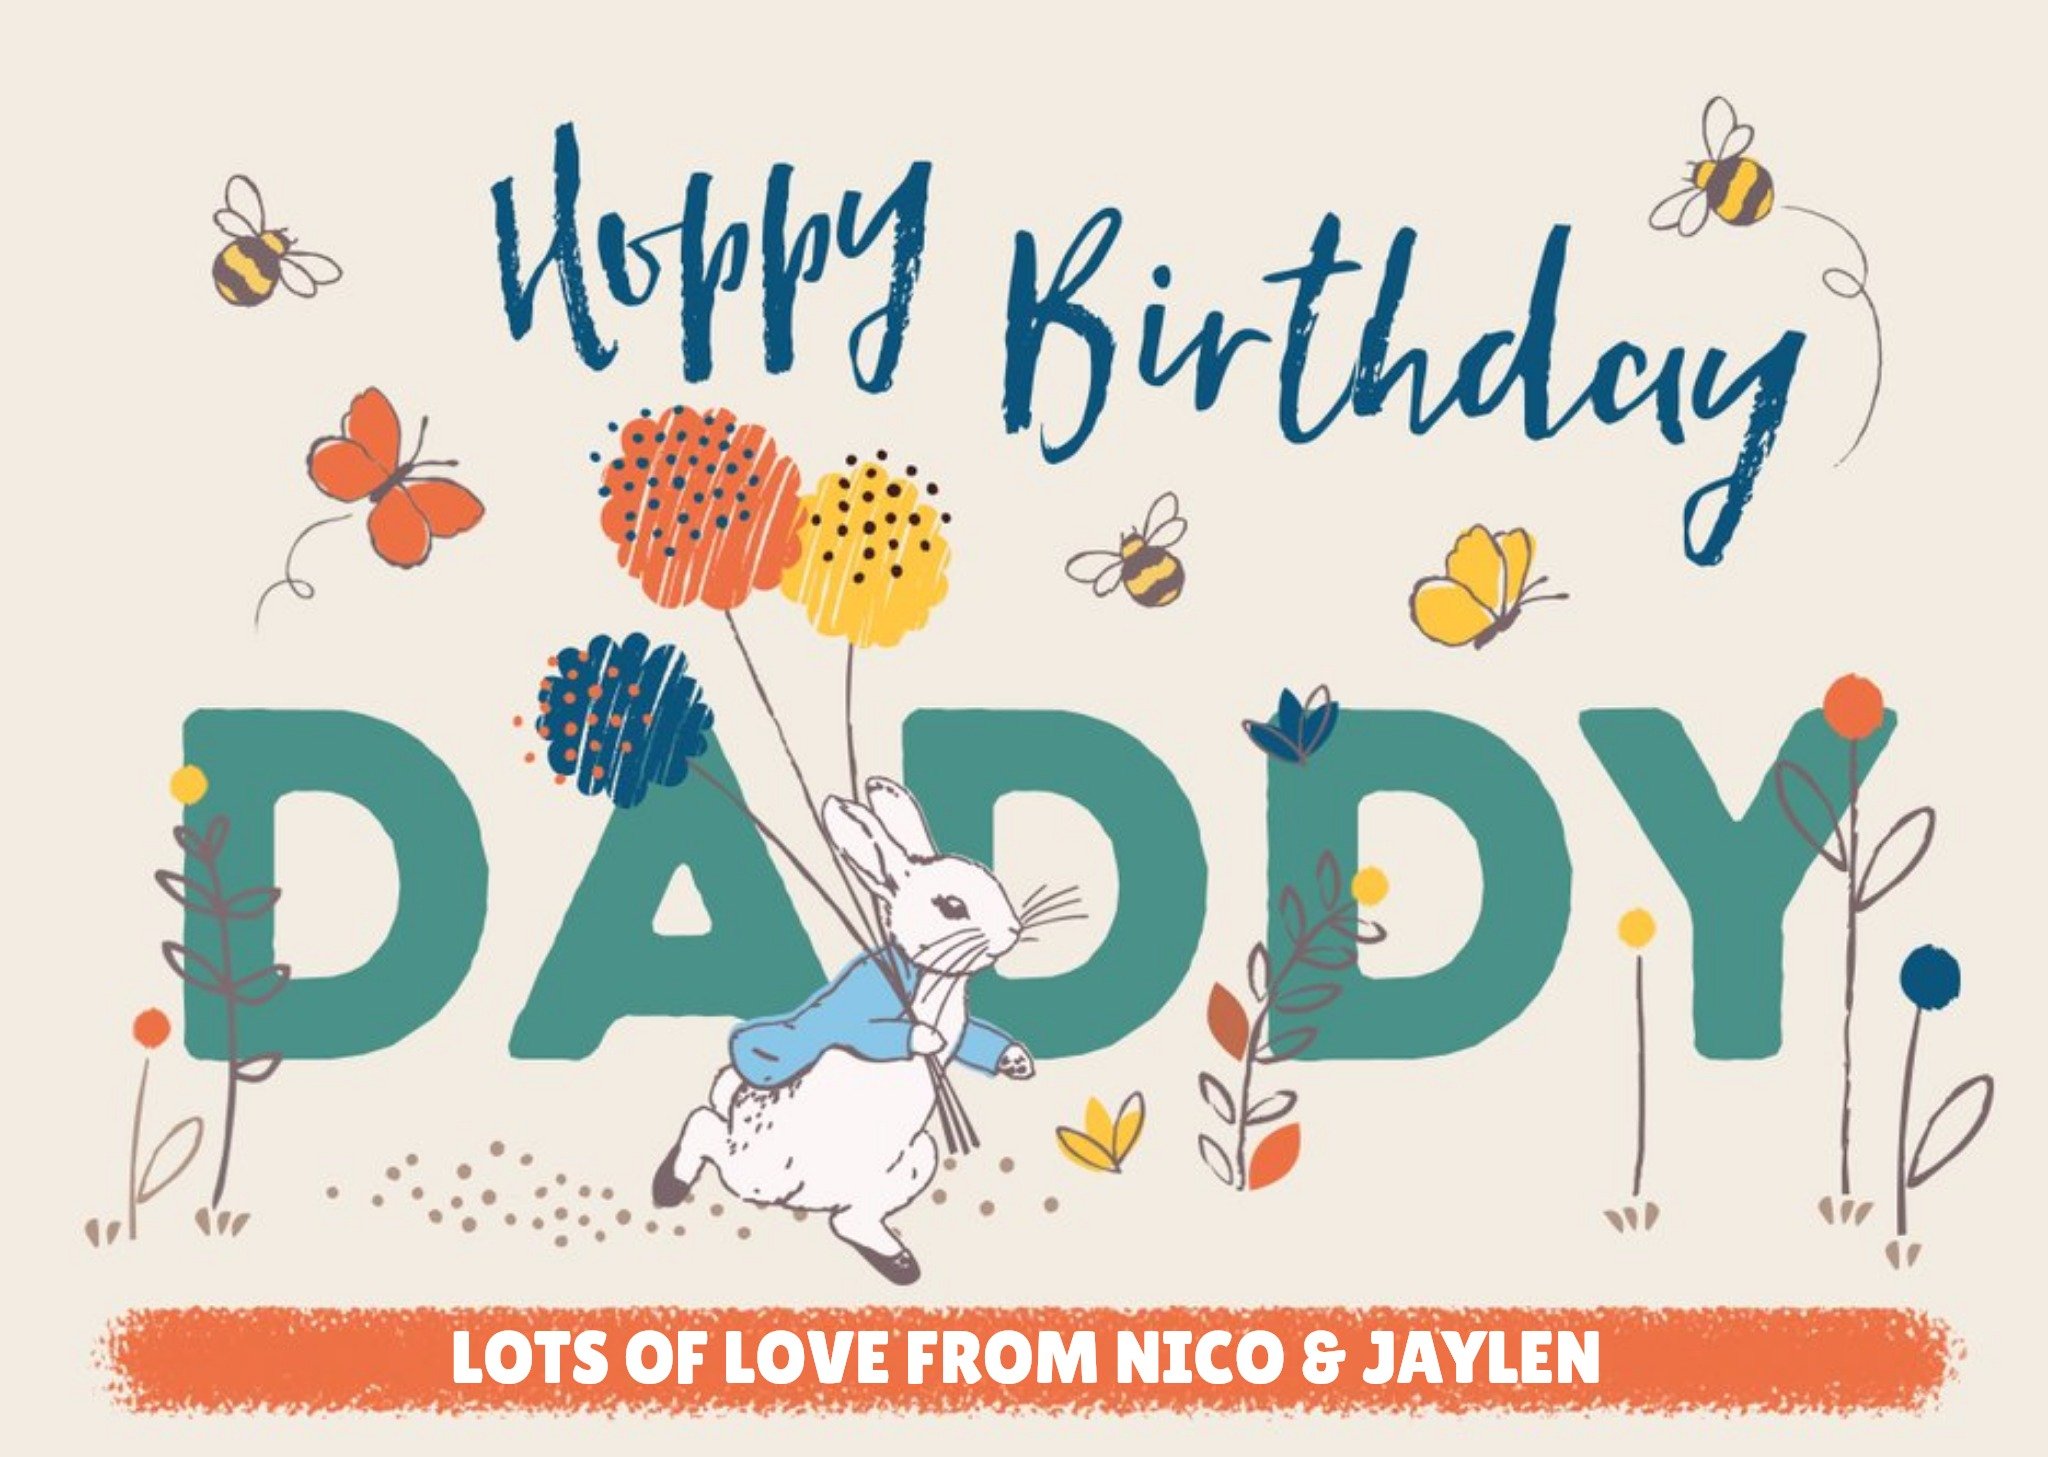 Peter Rabbit Hoppy Birthday Card For Daddy, Large